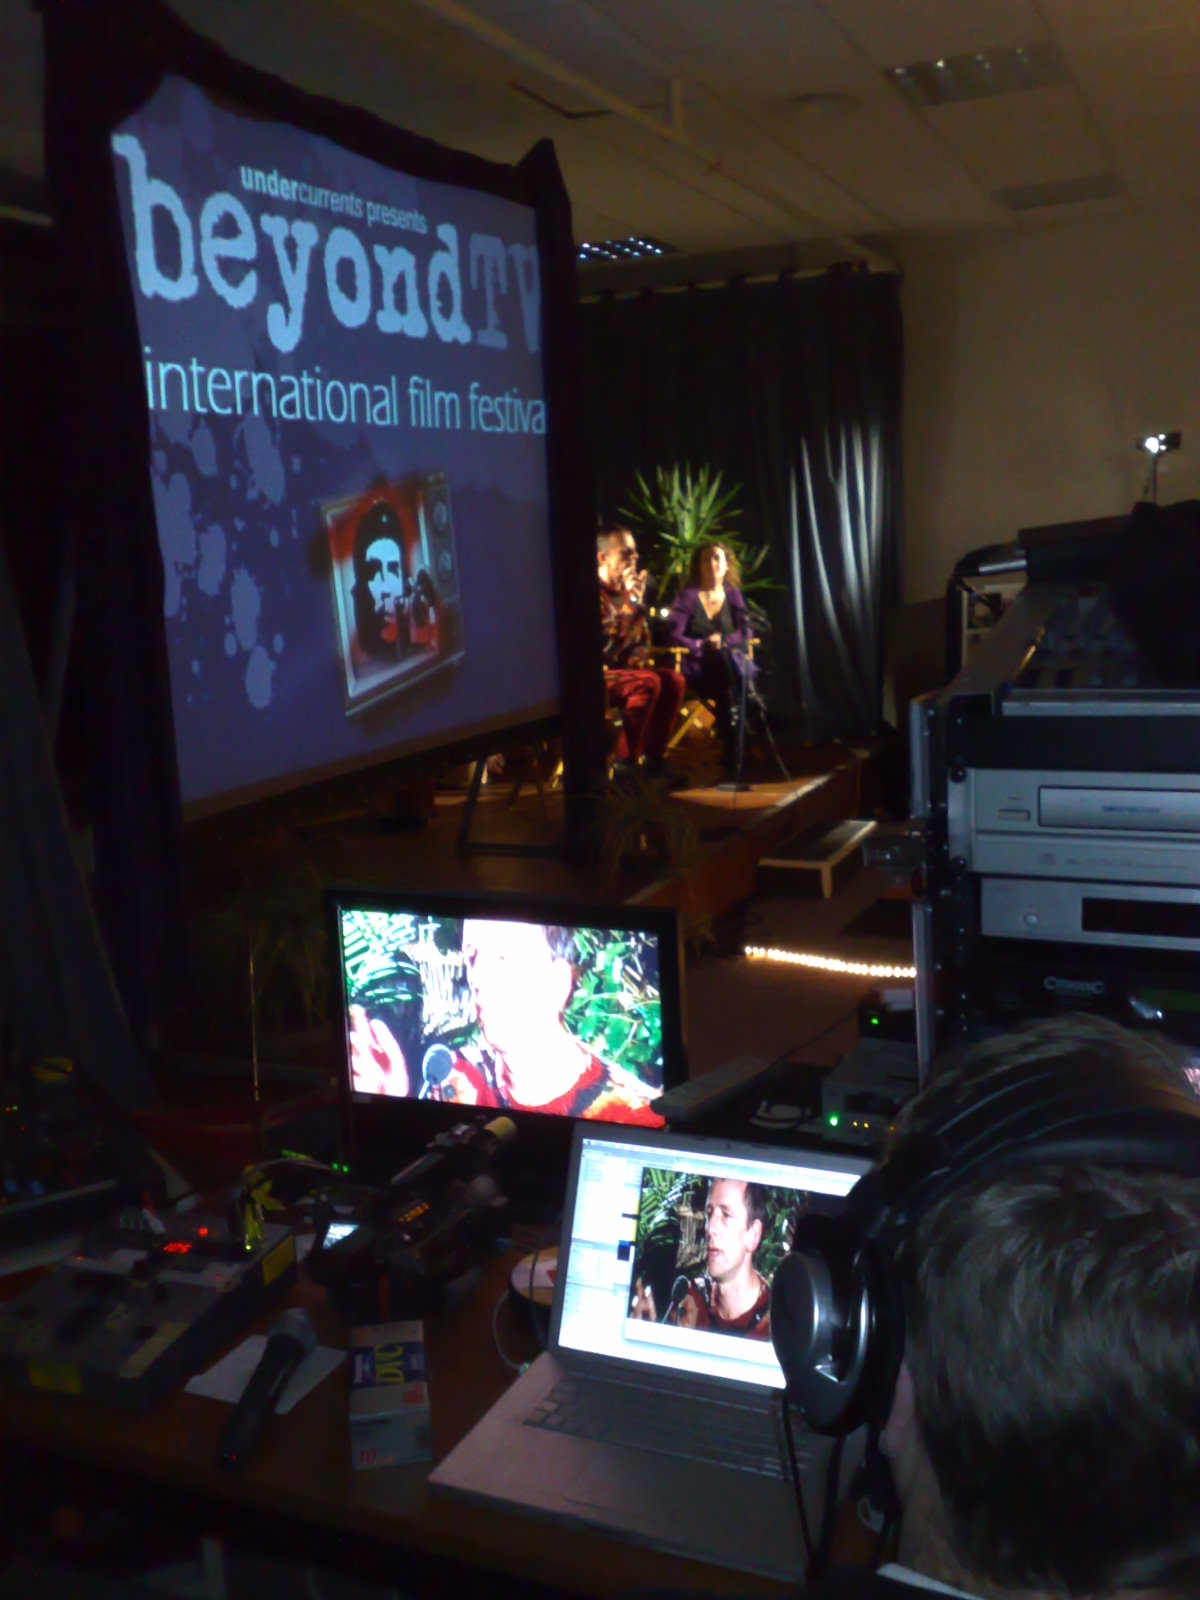 Beyond Tv stage